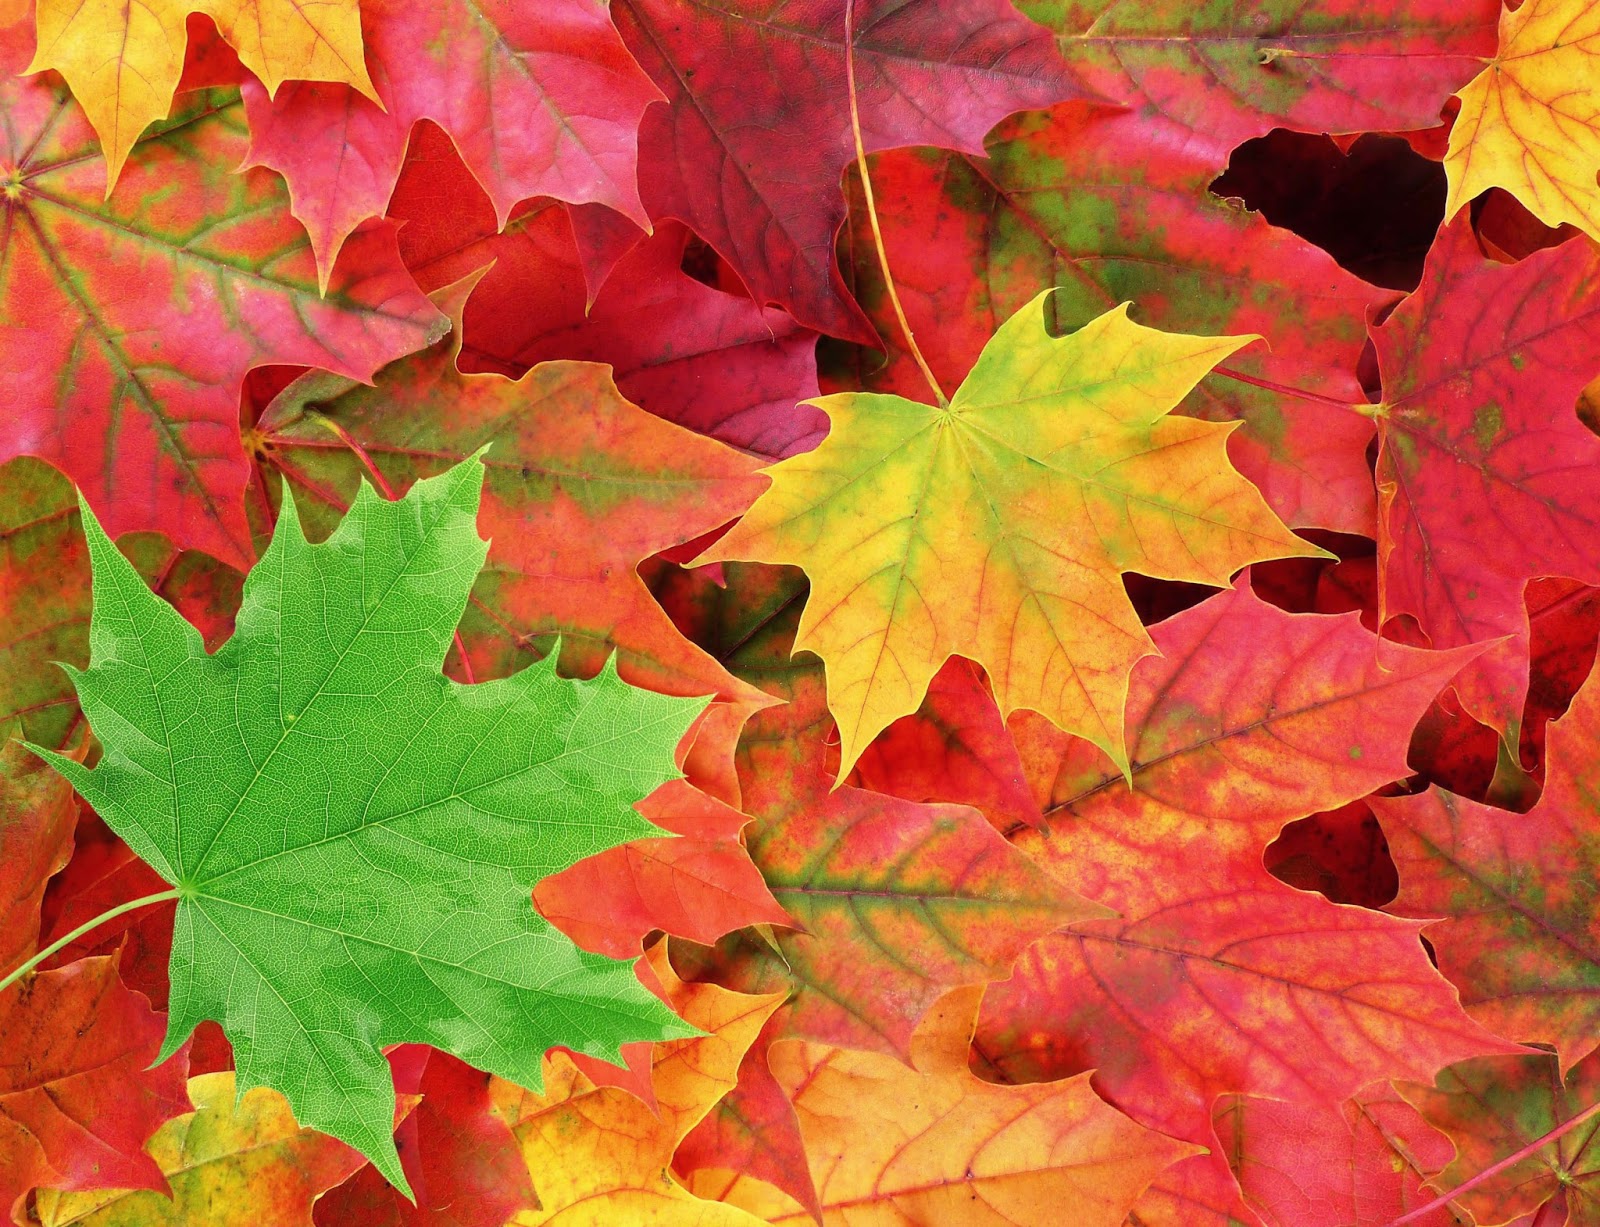 Nature Snacks: Why do Leaves Change Color in the Fall?